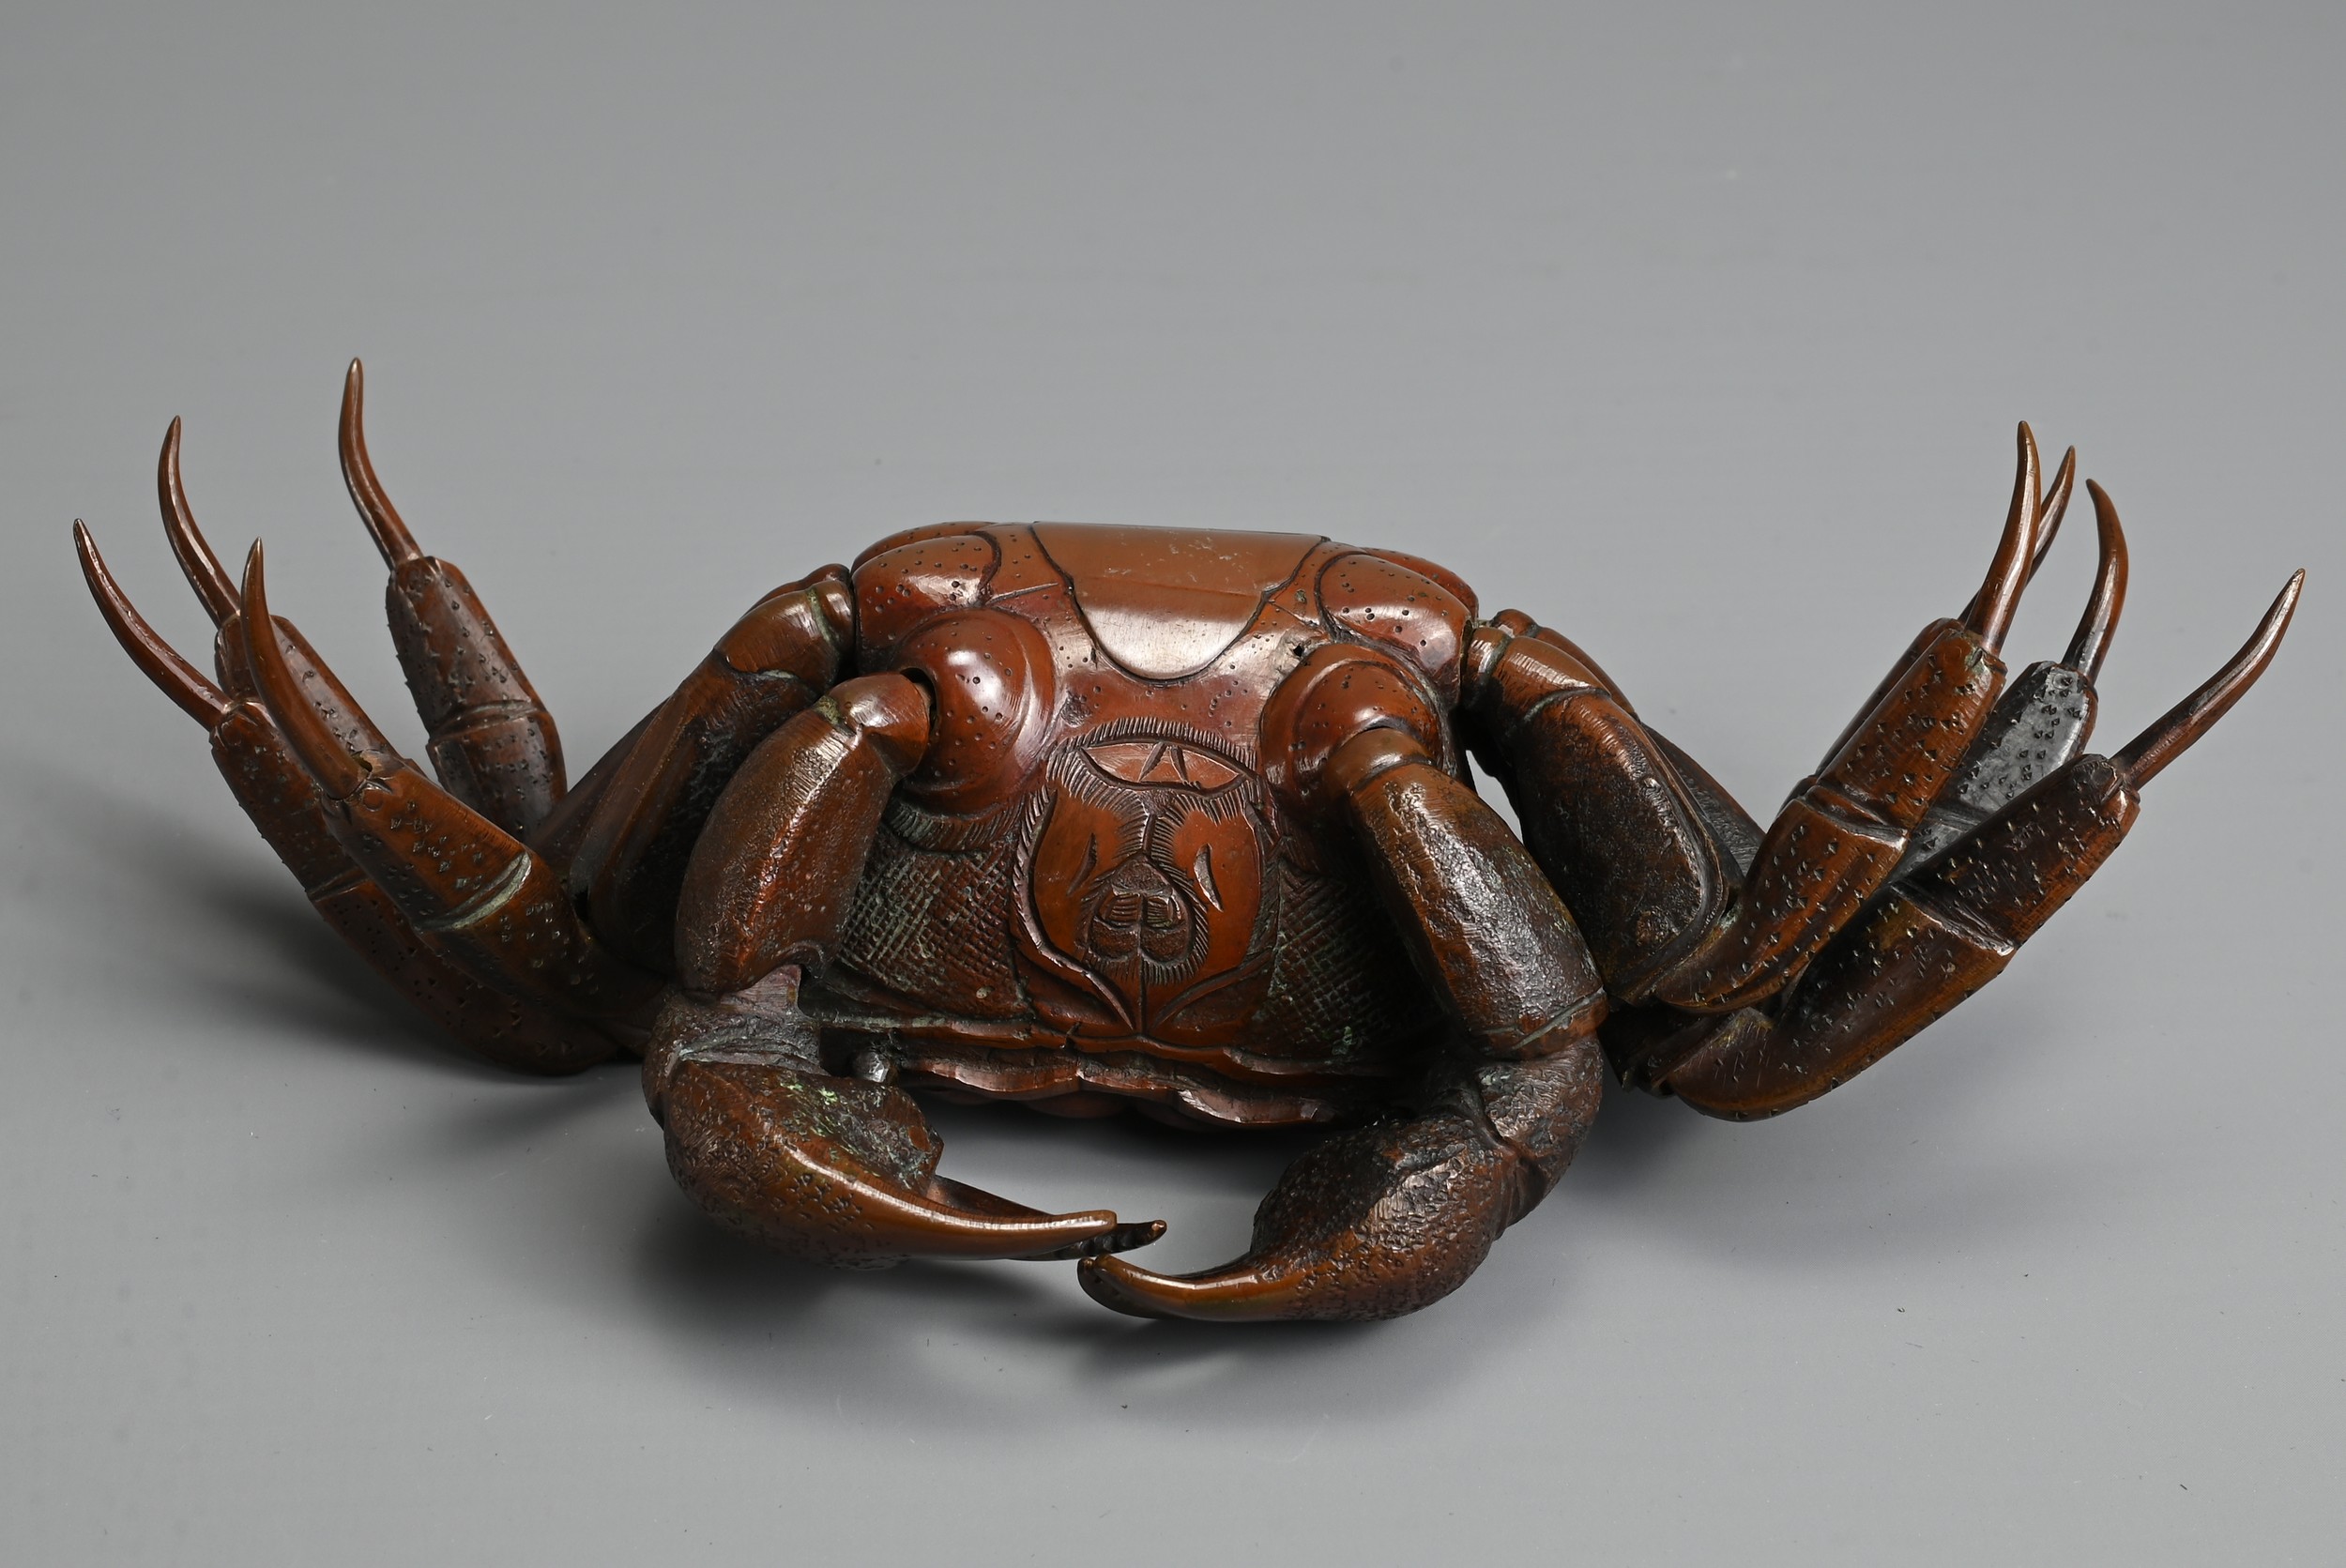 A JAPANESE MEIJI PERIOD (1868-1912) BRONZE JIZAI OKIMONO OF A CRAB. With articulated legs, claws and - Image 6 of 7